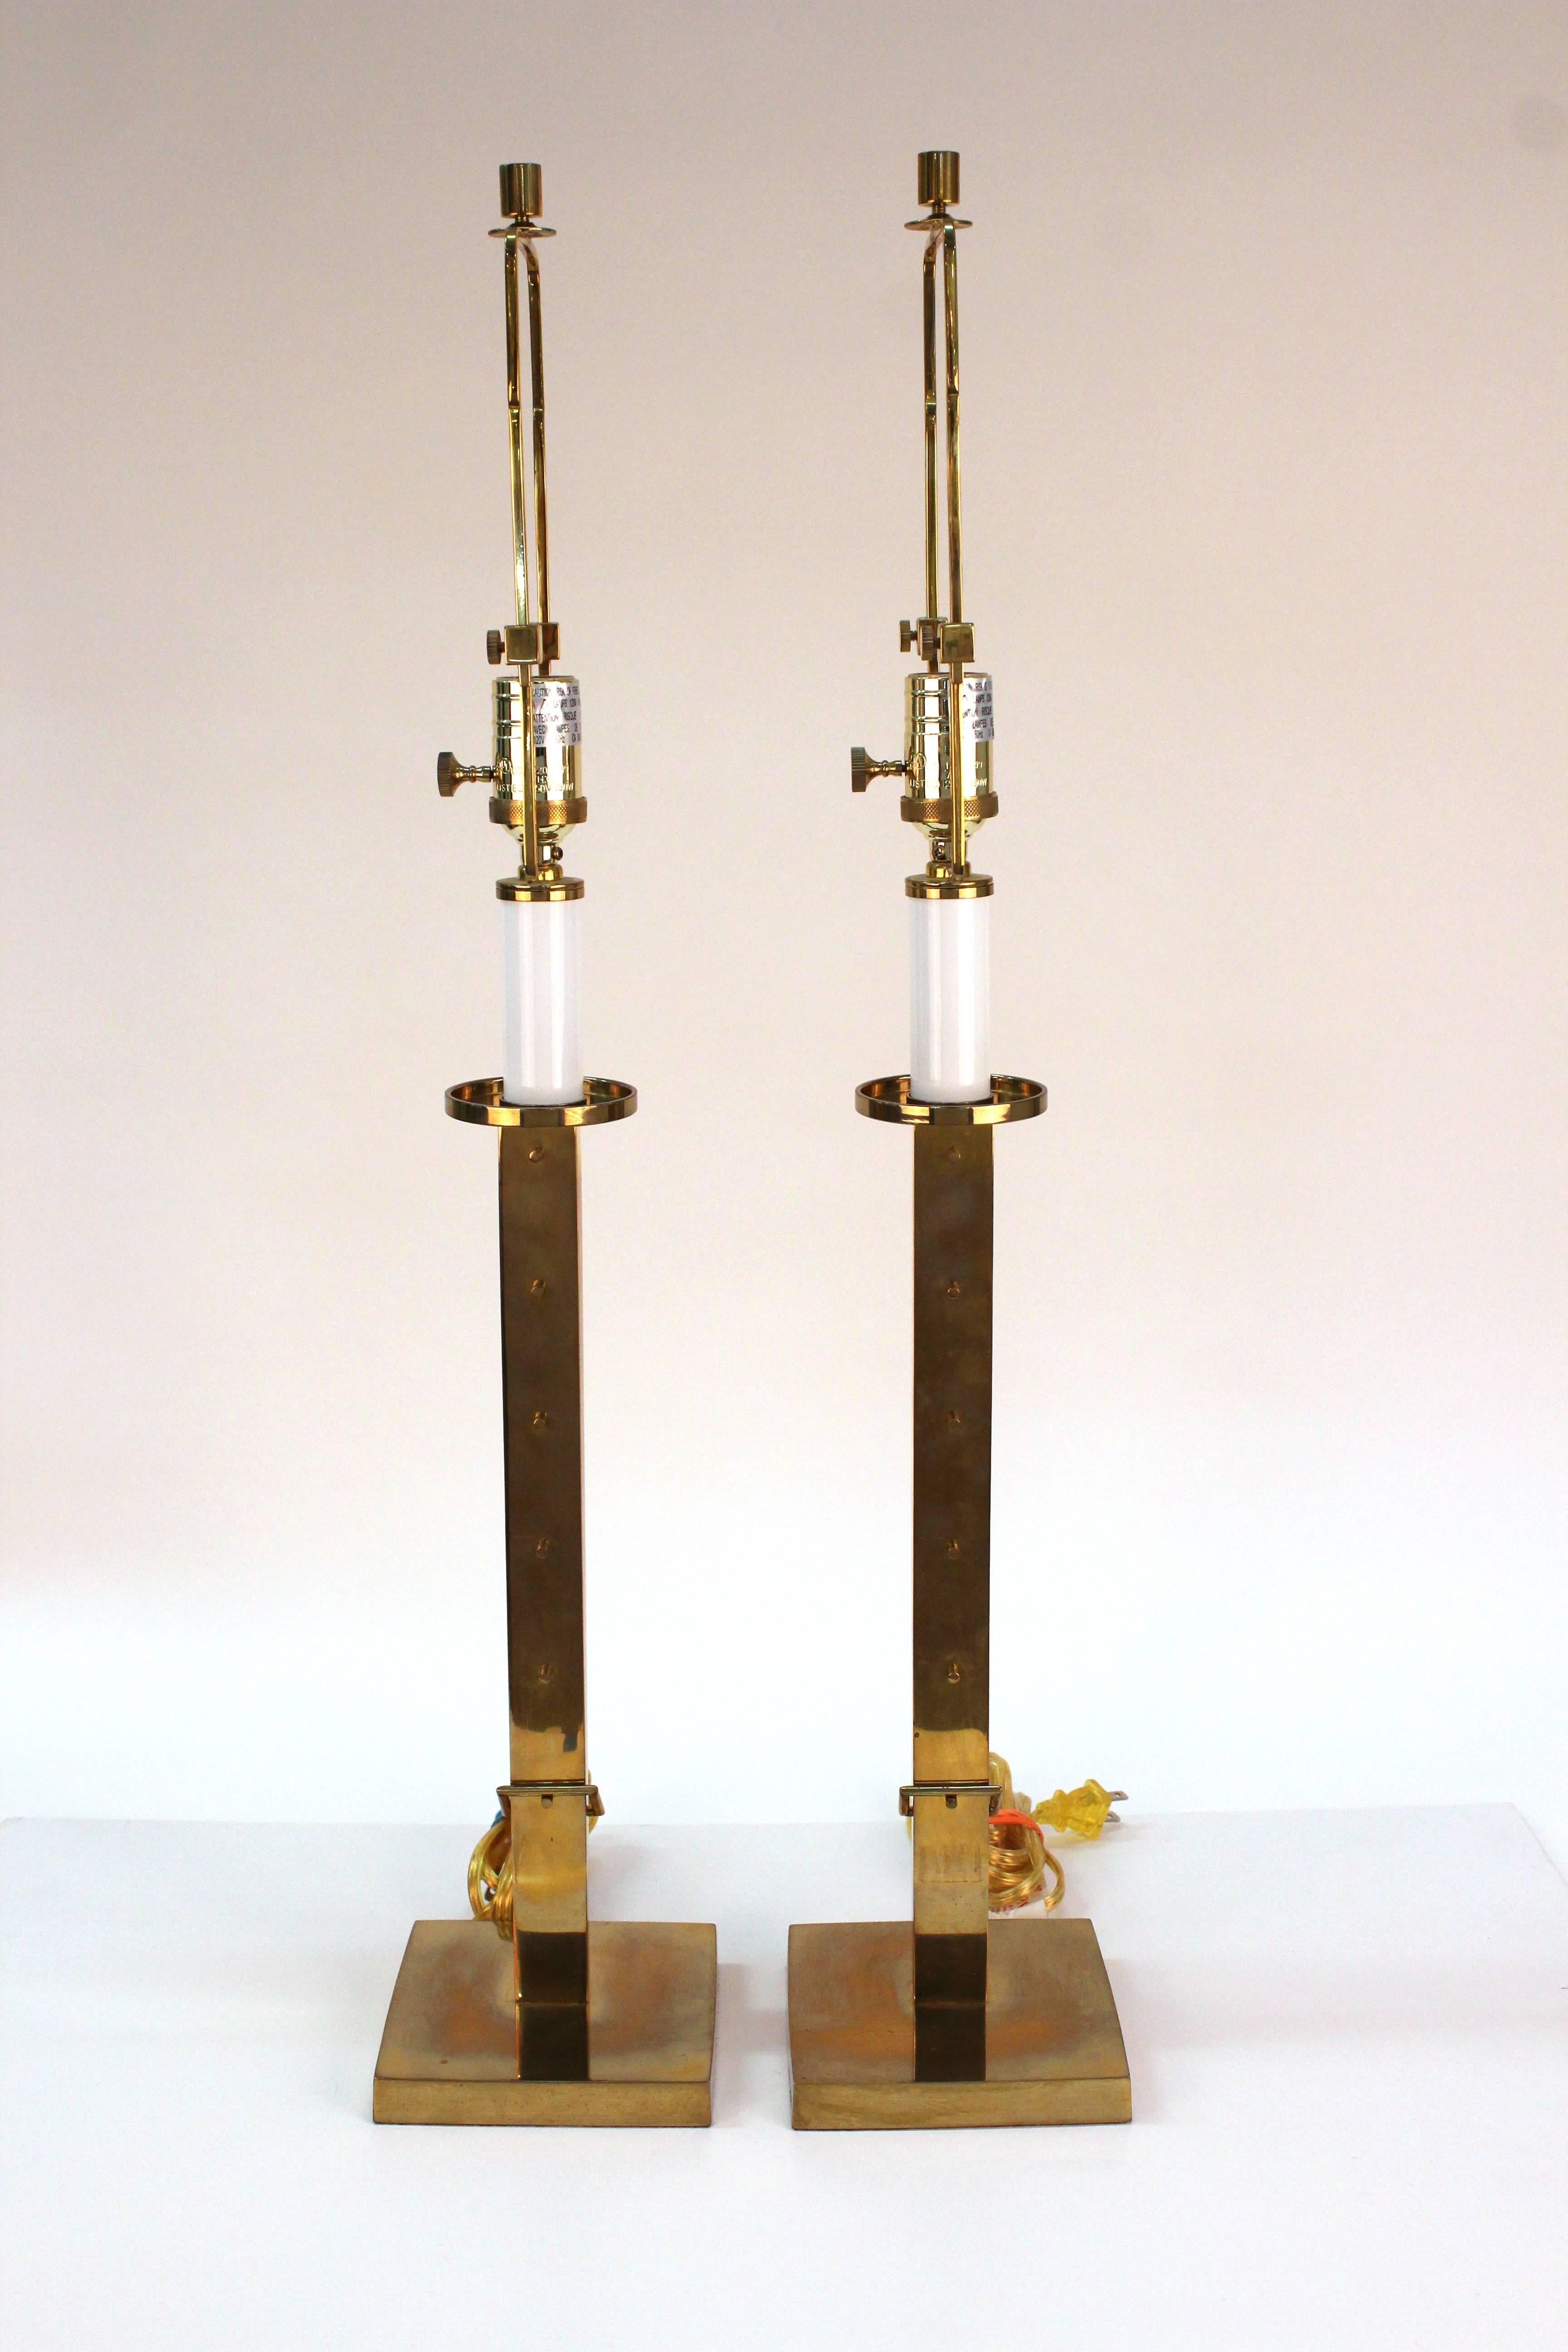 A pair of polished brass table lamps produced by Ralph Lauren with ratcheted stems.

110496